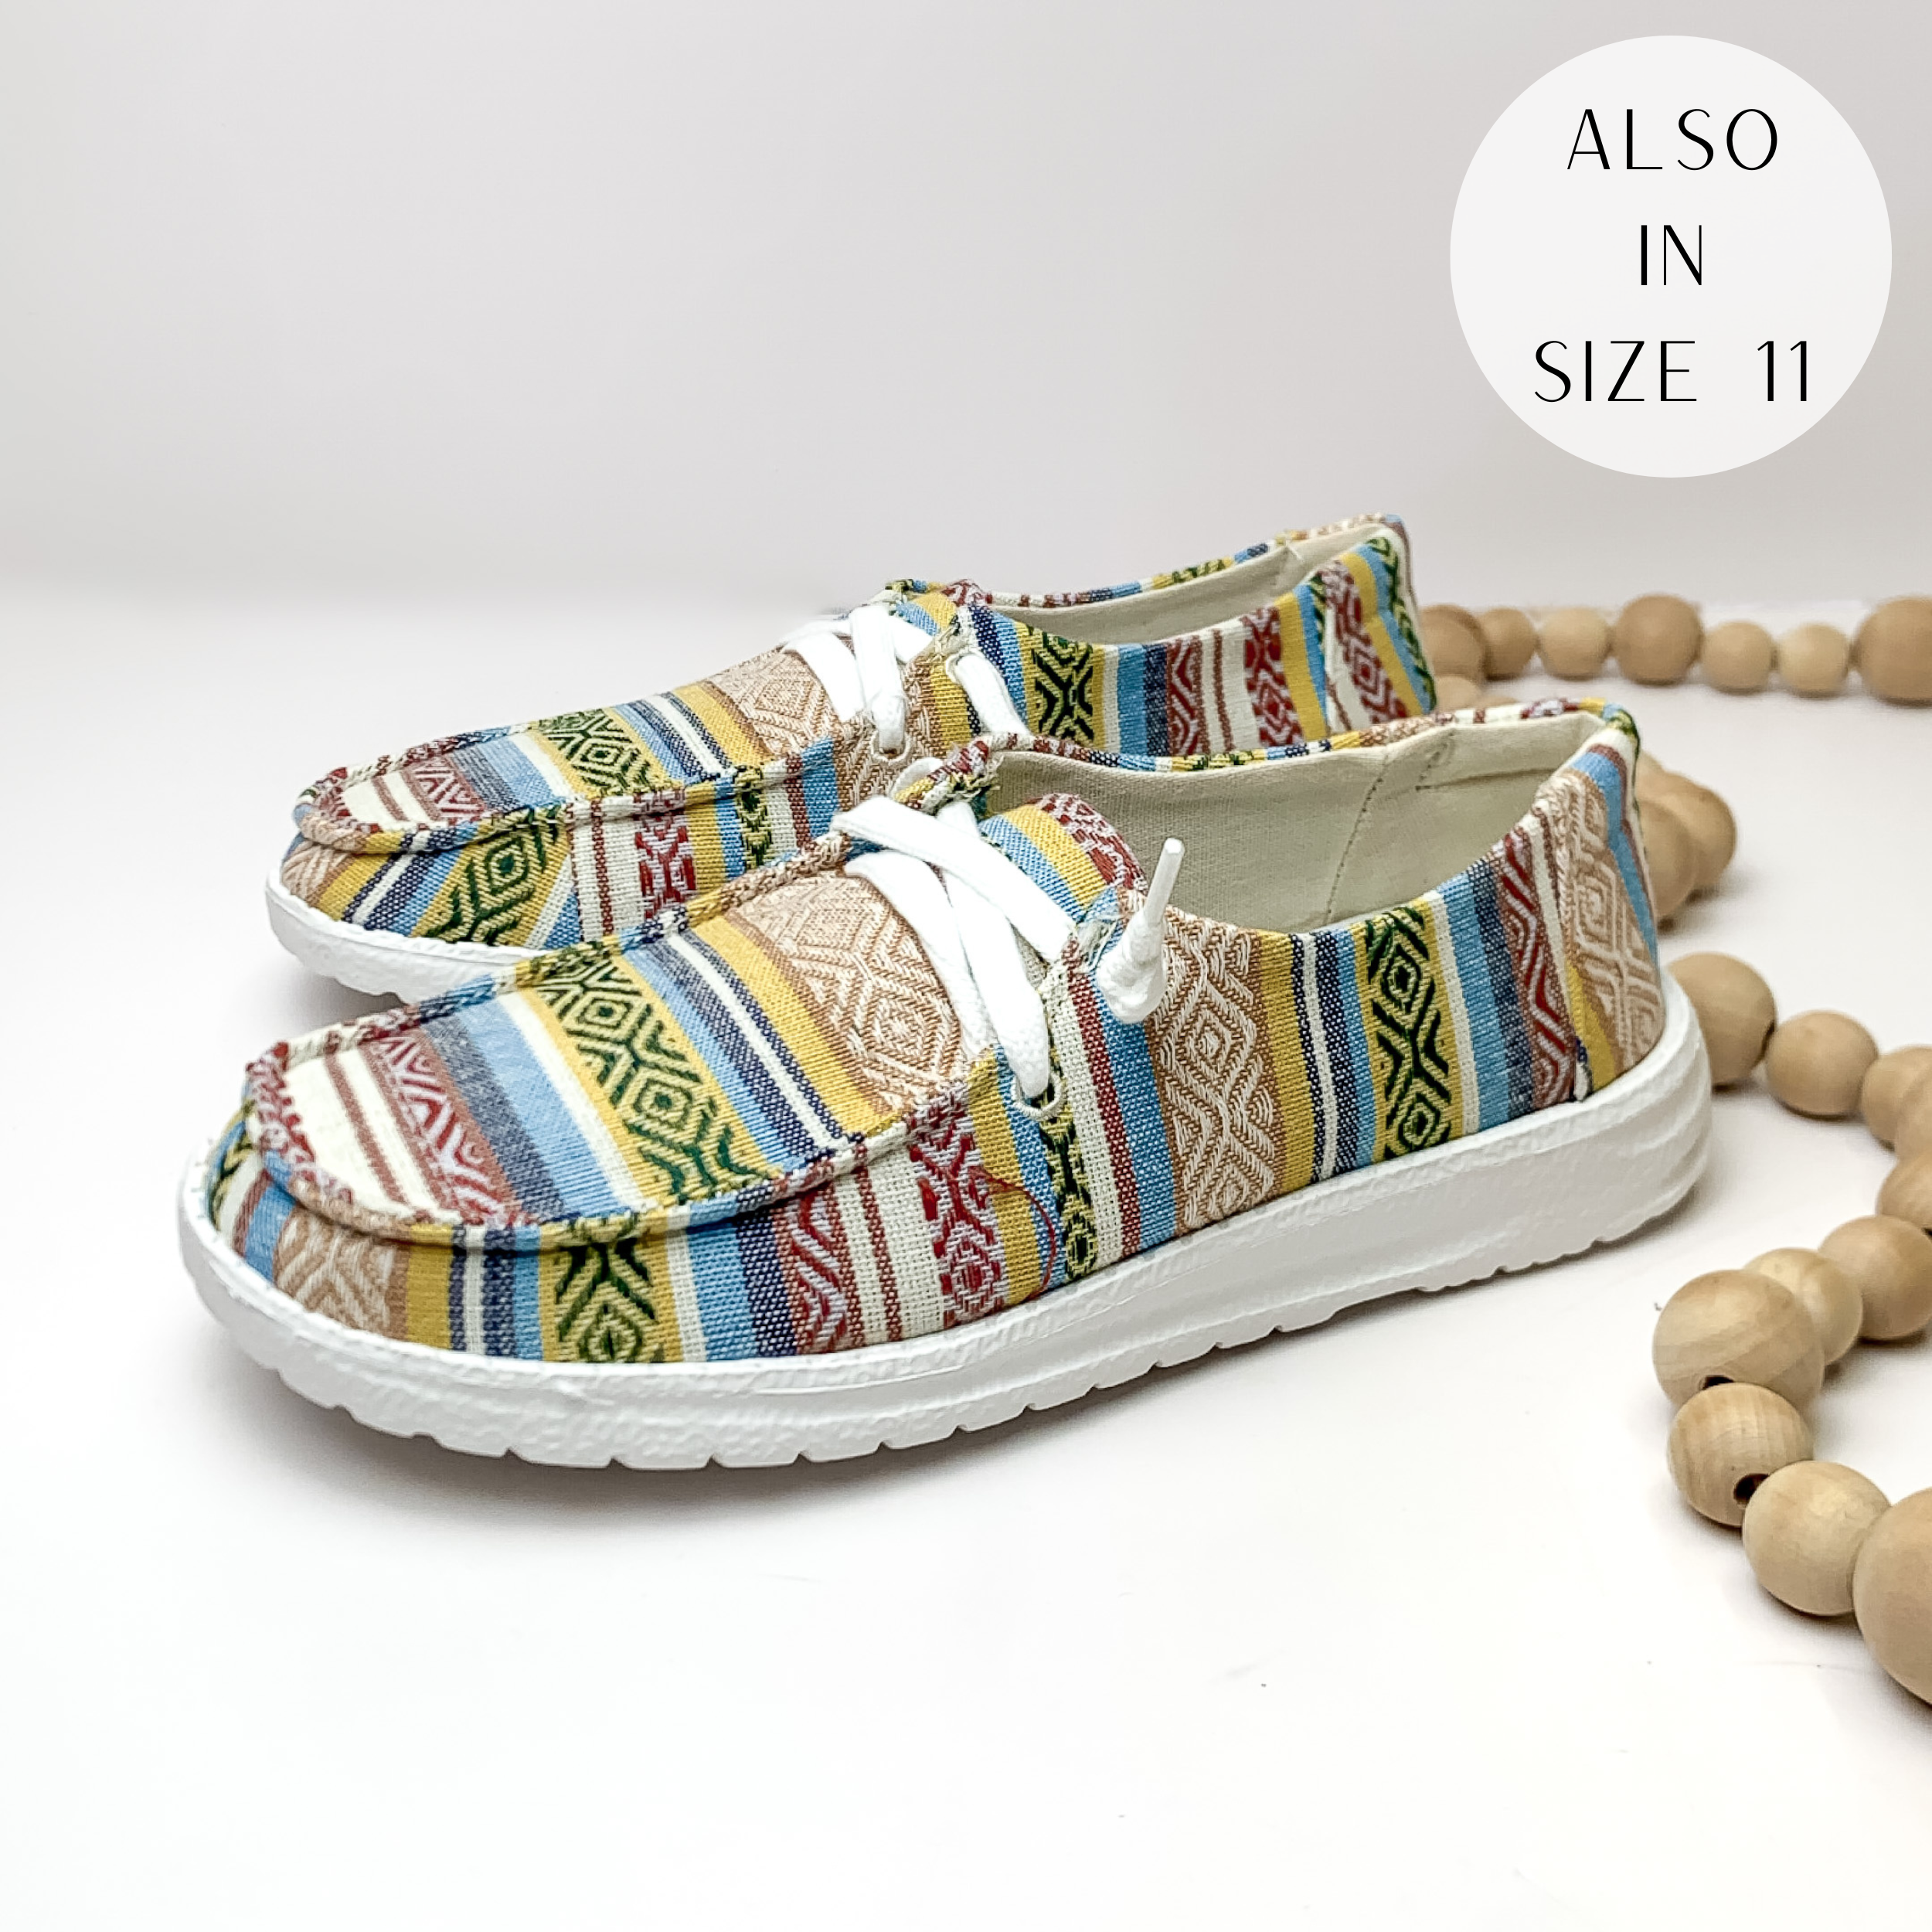 Pictured are a pair of cream canvas shoes with a multicolored tribal print with a white sole and white laces. These shoes are pictured on a white background with tan beads on the right side.